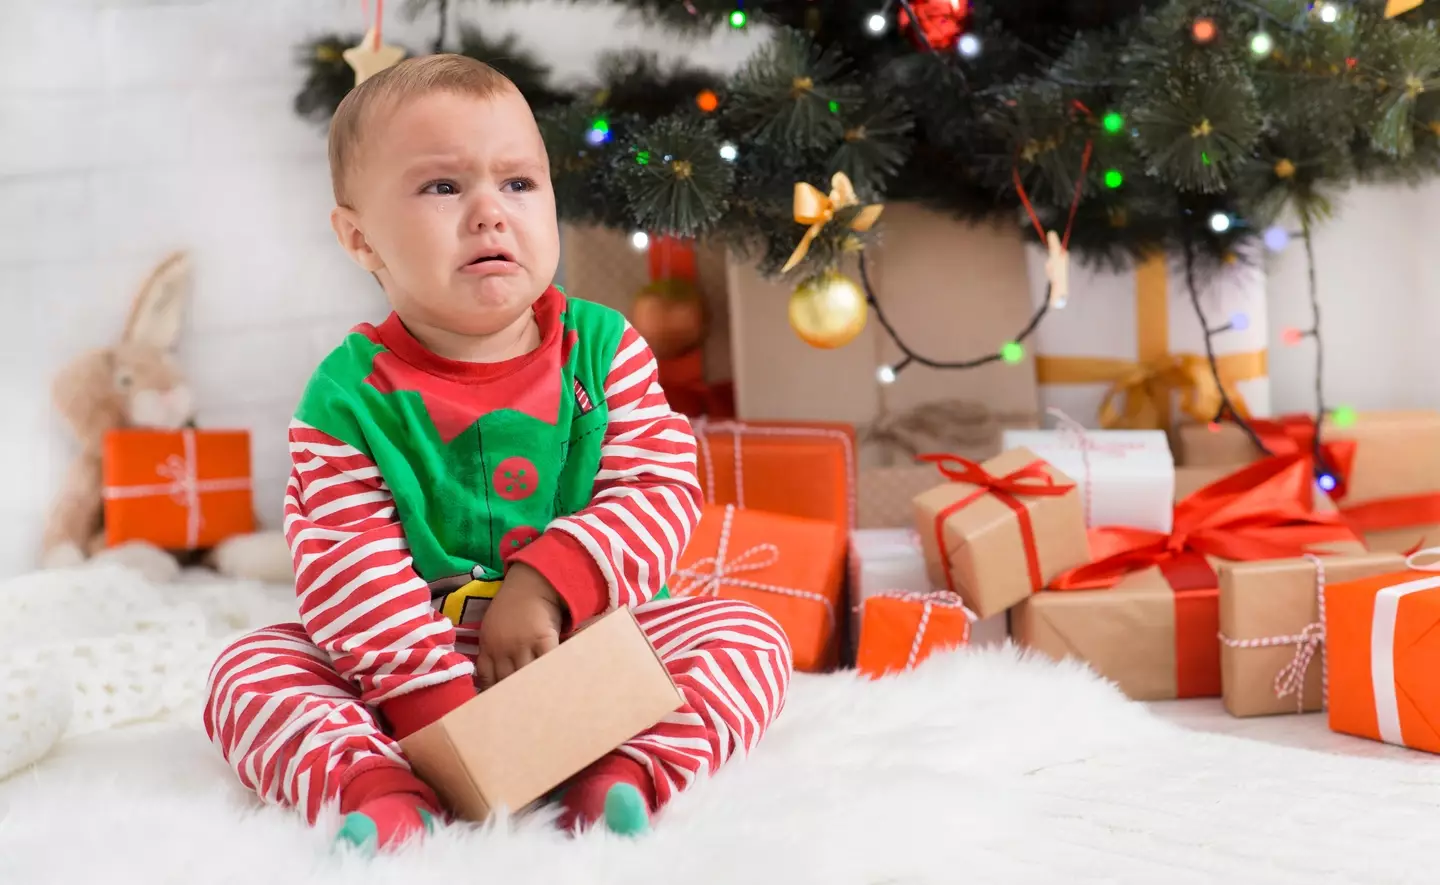 All parents know that Christmas can be a stressful time (stock image).